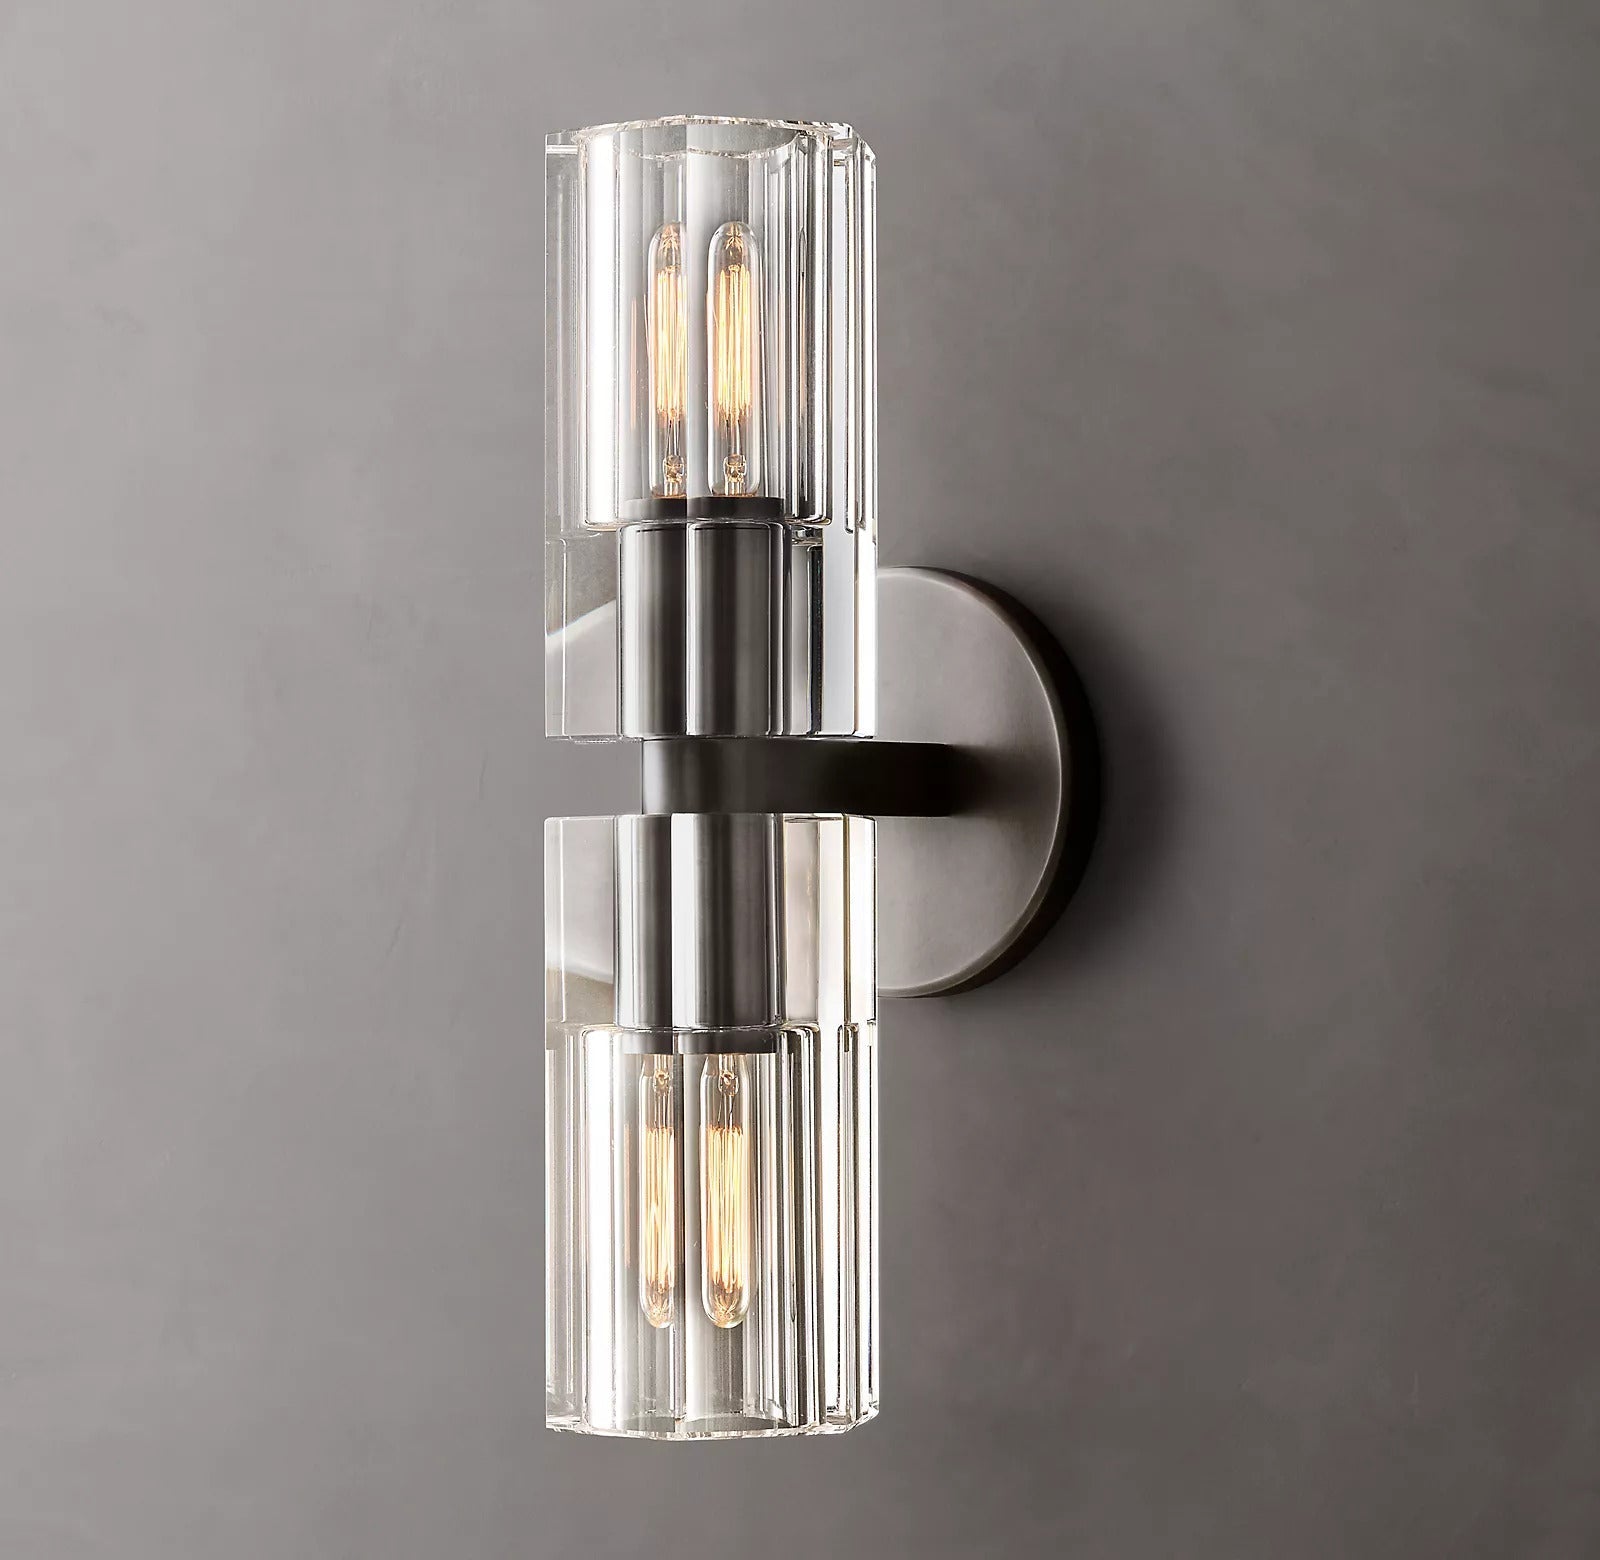 AKZONE Crystal Linear Wall Sconce 13"H